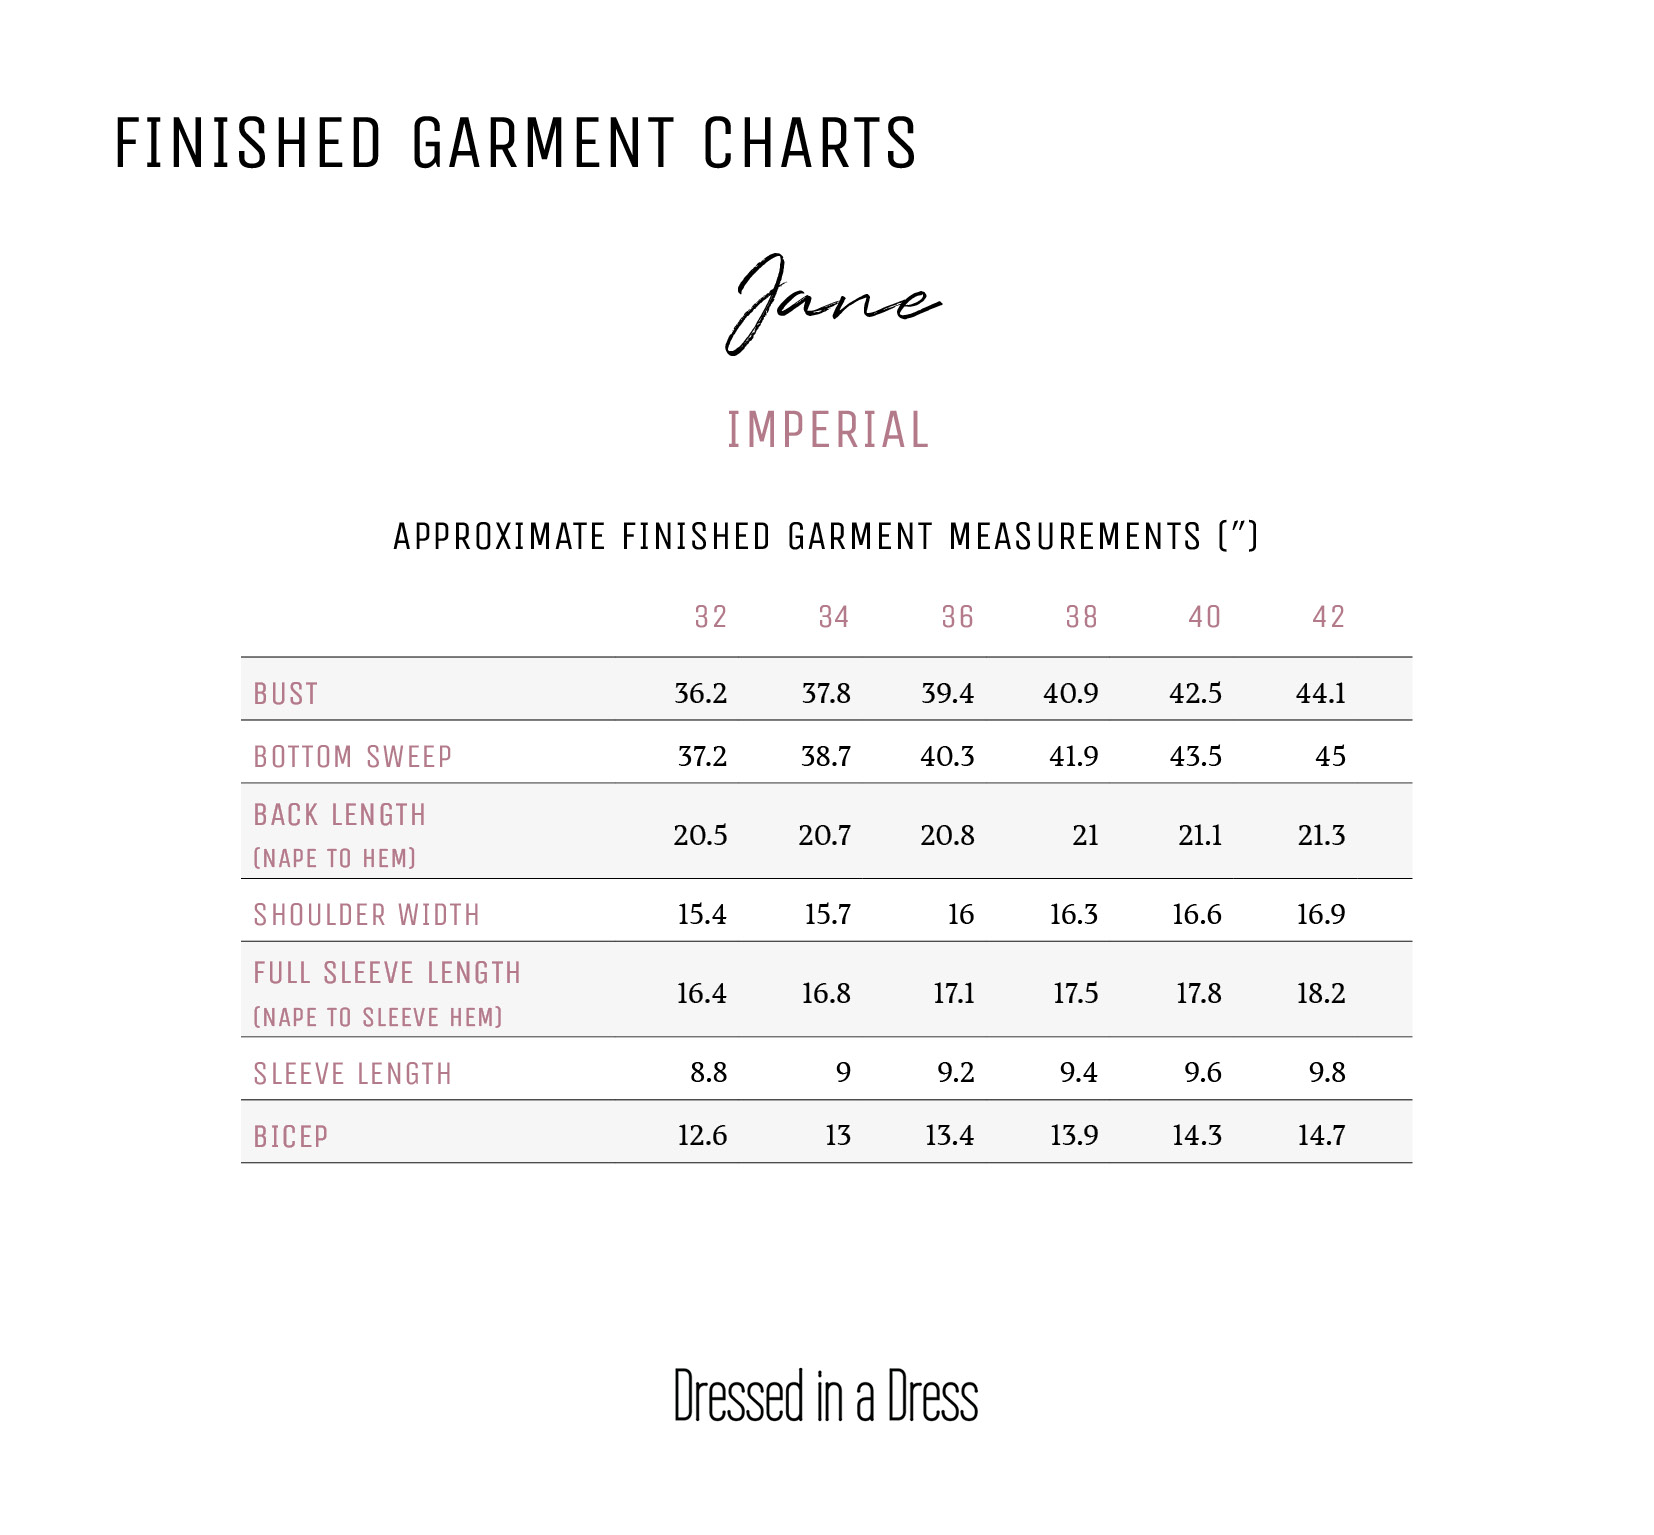 Jane Finished Garment Chart—Imperial